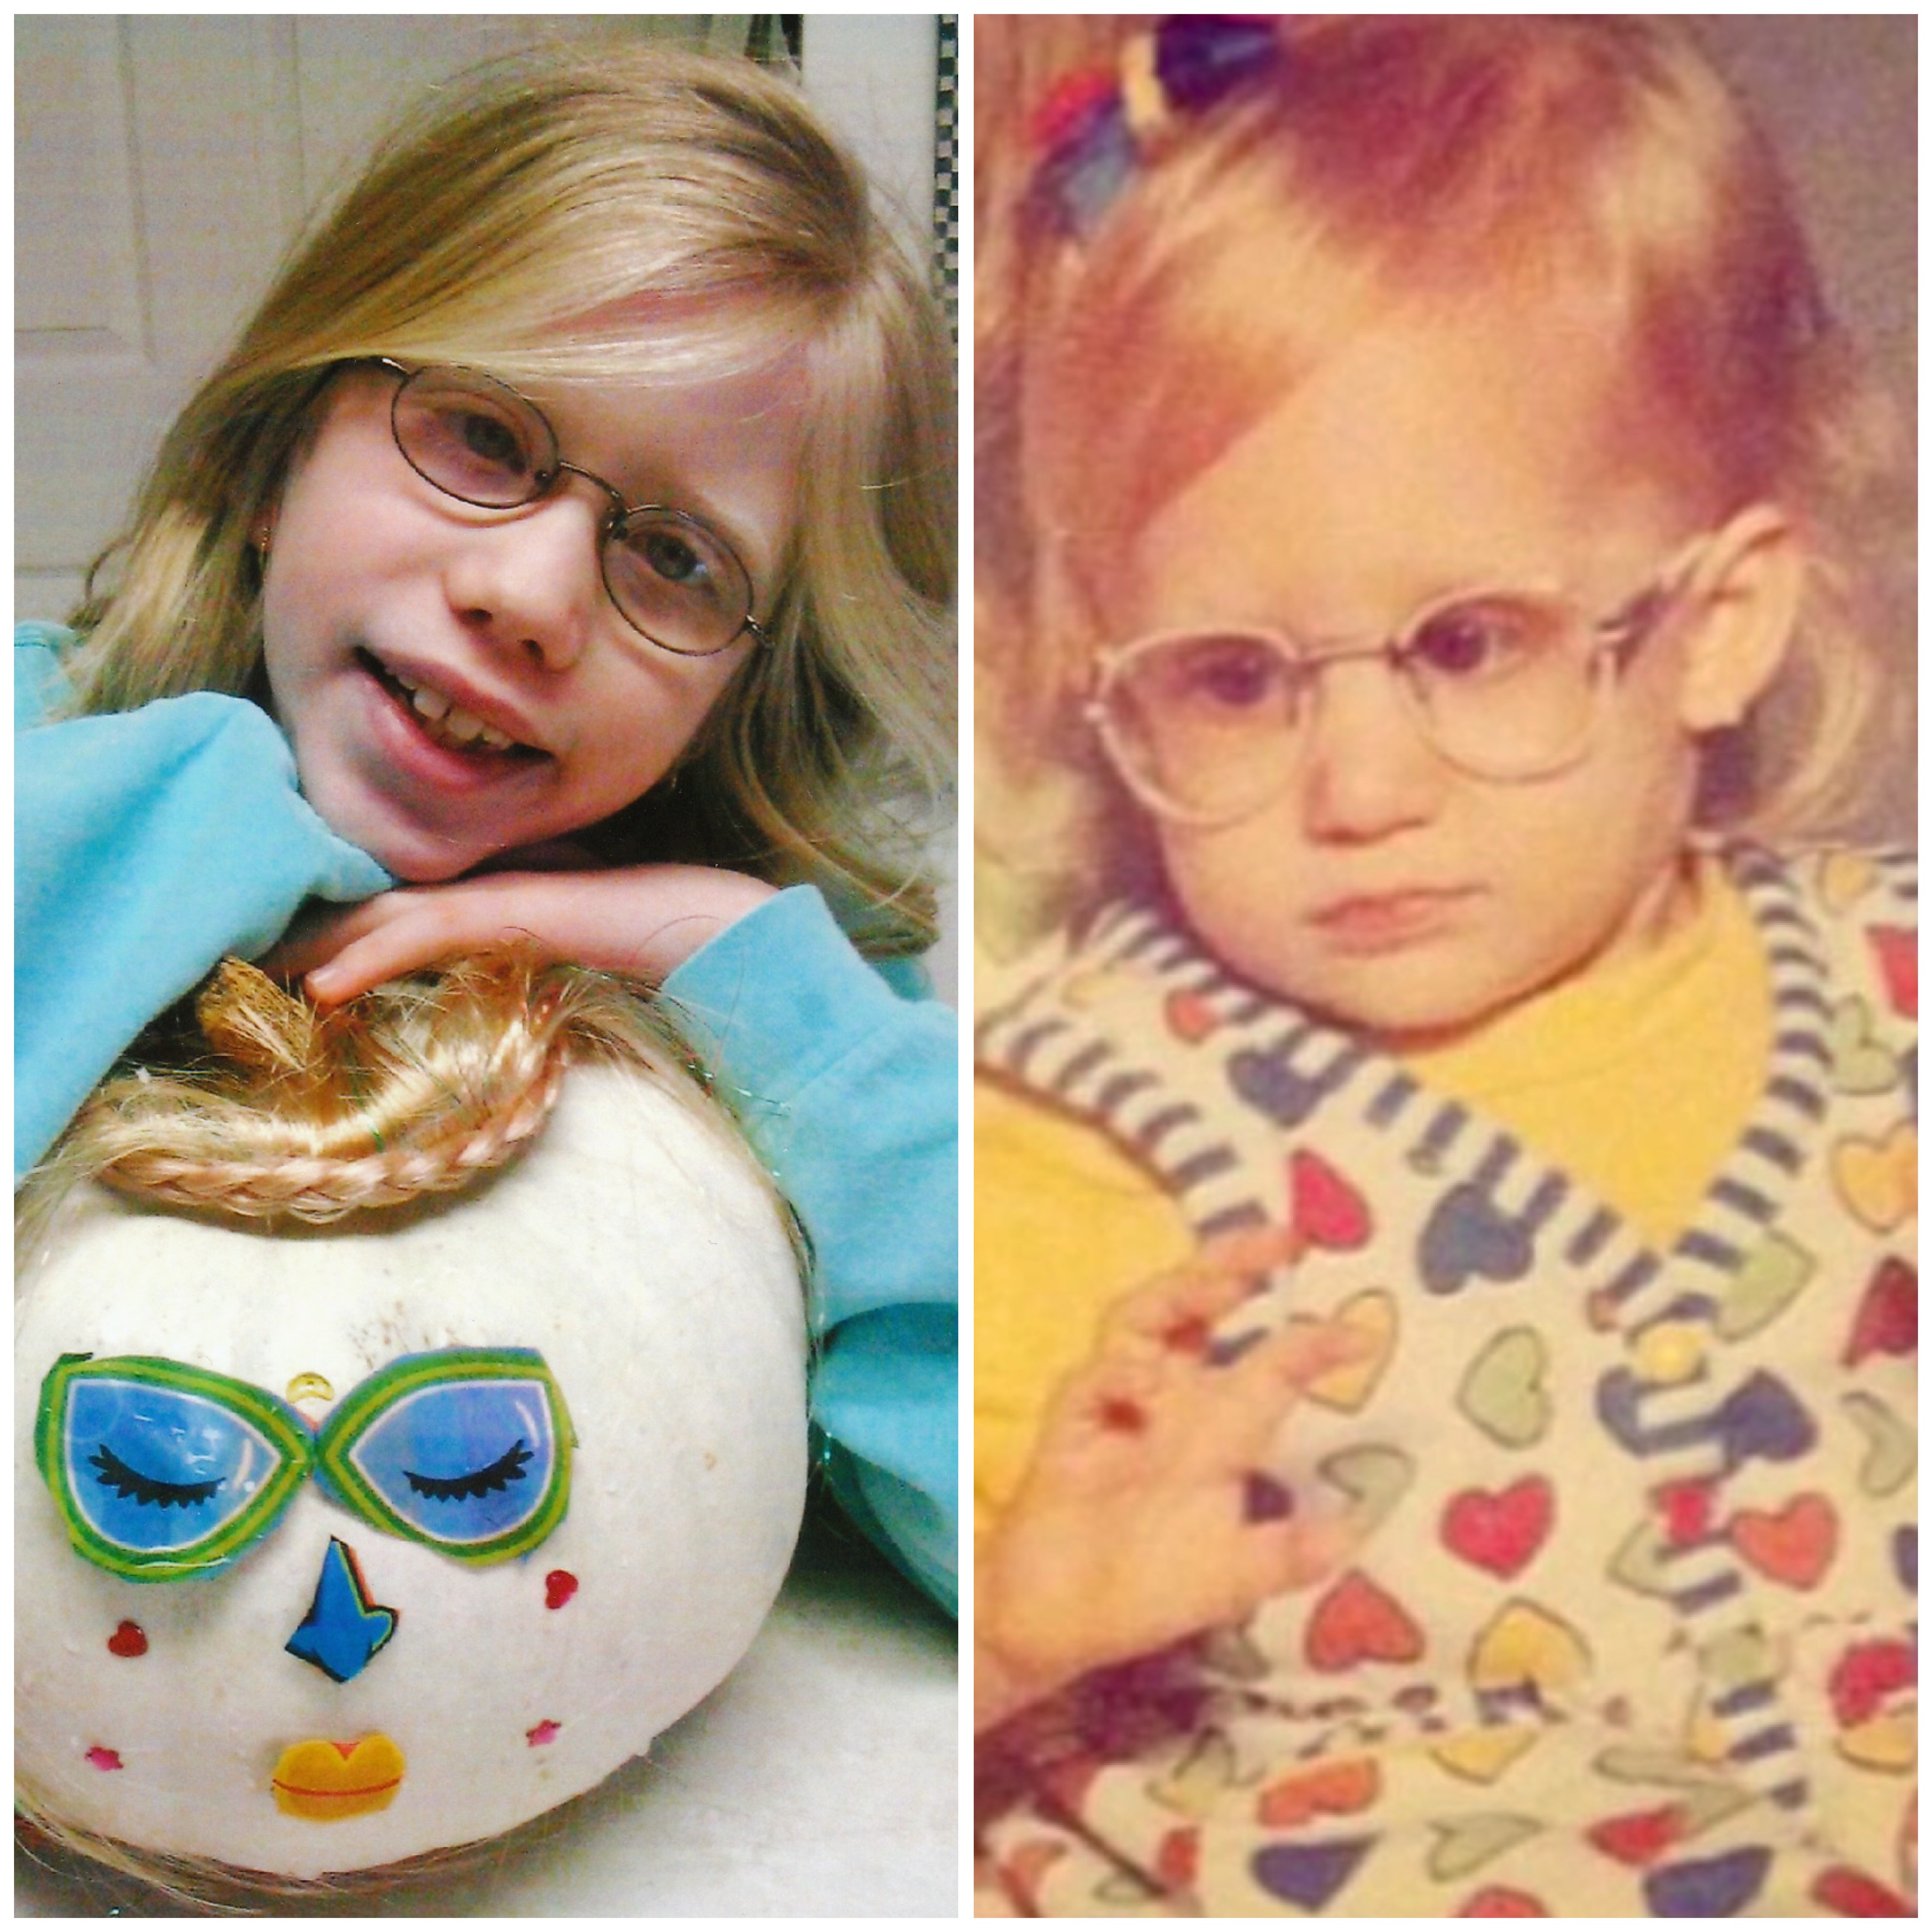 side by side collage of young cass and baby case wearing glasses! cass, about 7, wears small oval glasses and rests her hands on a white pumpkin decorated with a paper face. casey, about 1, wears baby sized pink glasses and stares off unsmiling. she wears a yellow too and jumper with multicolored hearts